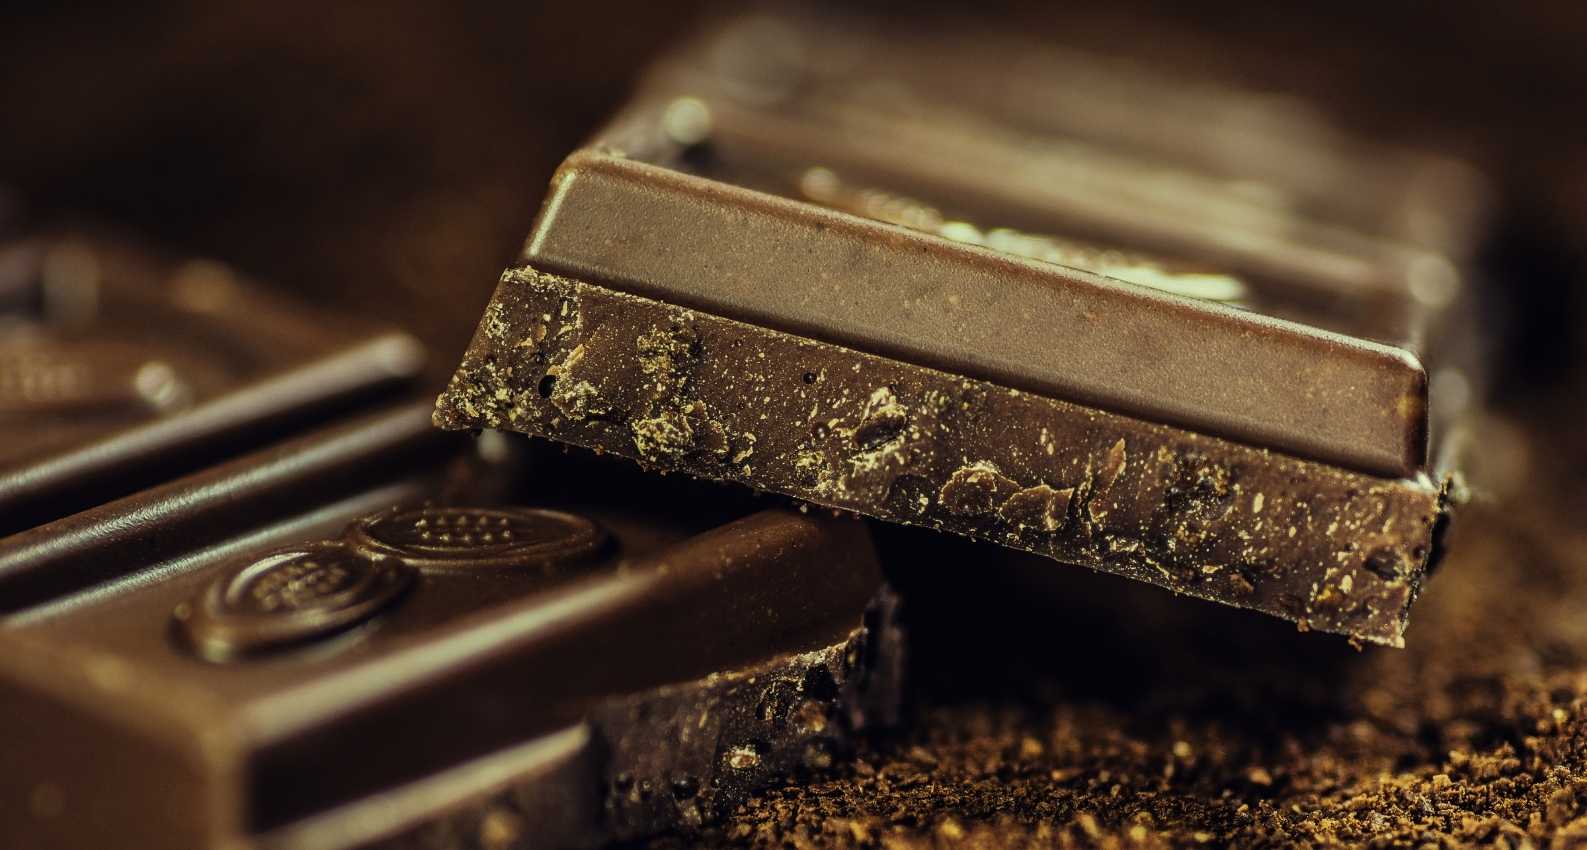 Dark chocolates, but specifically bars containing at least 70% cocoa, contain significant anti-inflammatory properties.